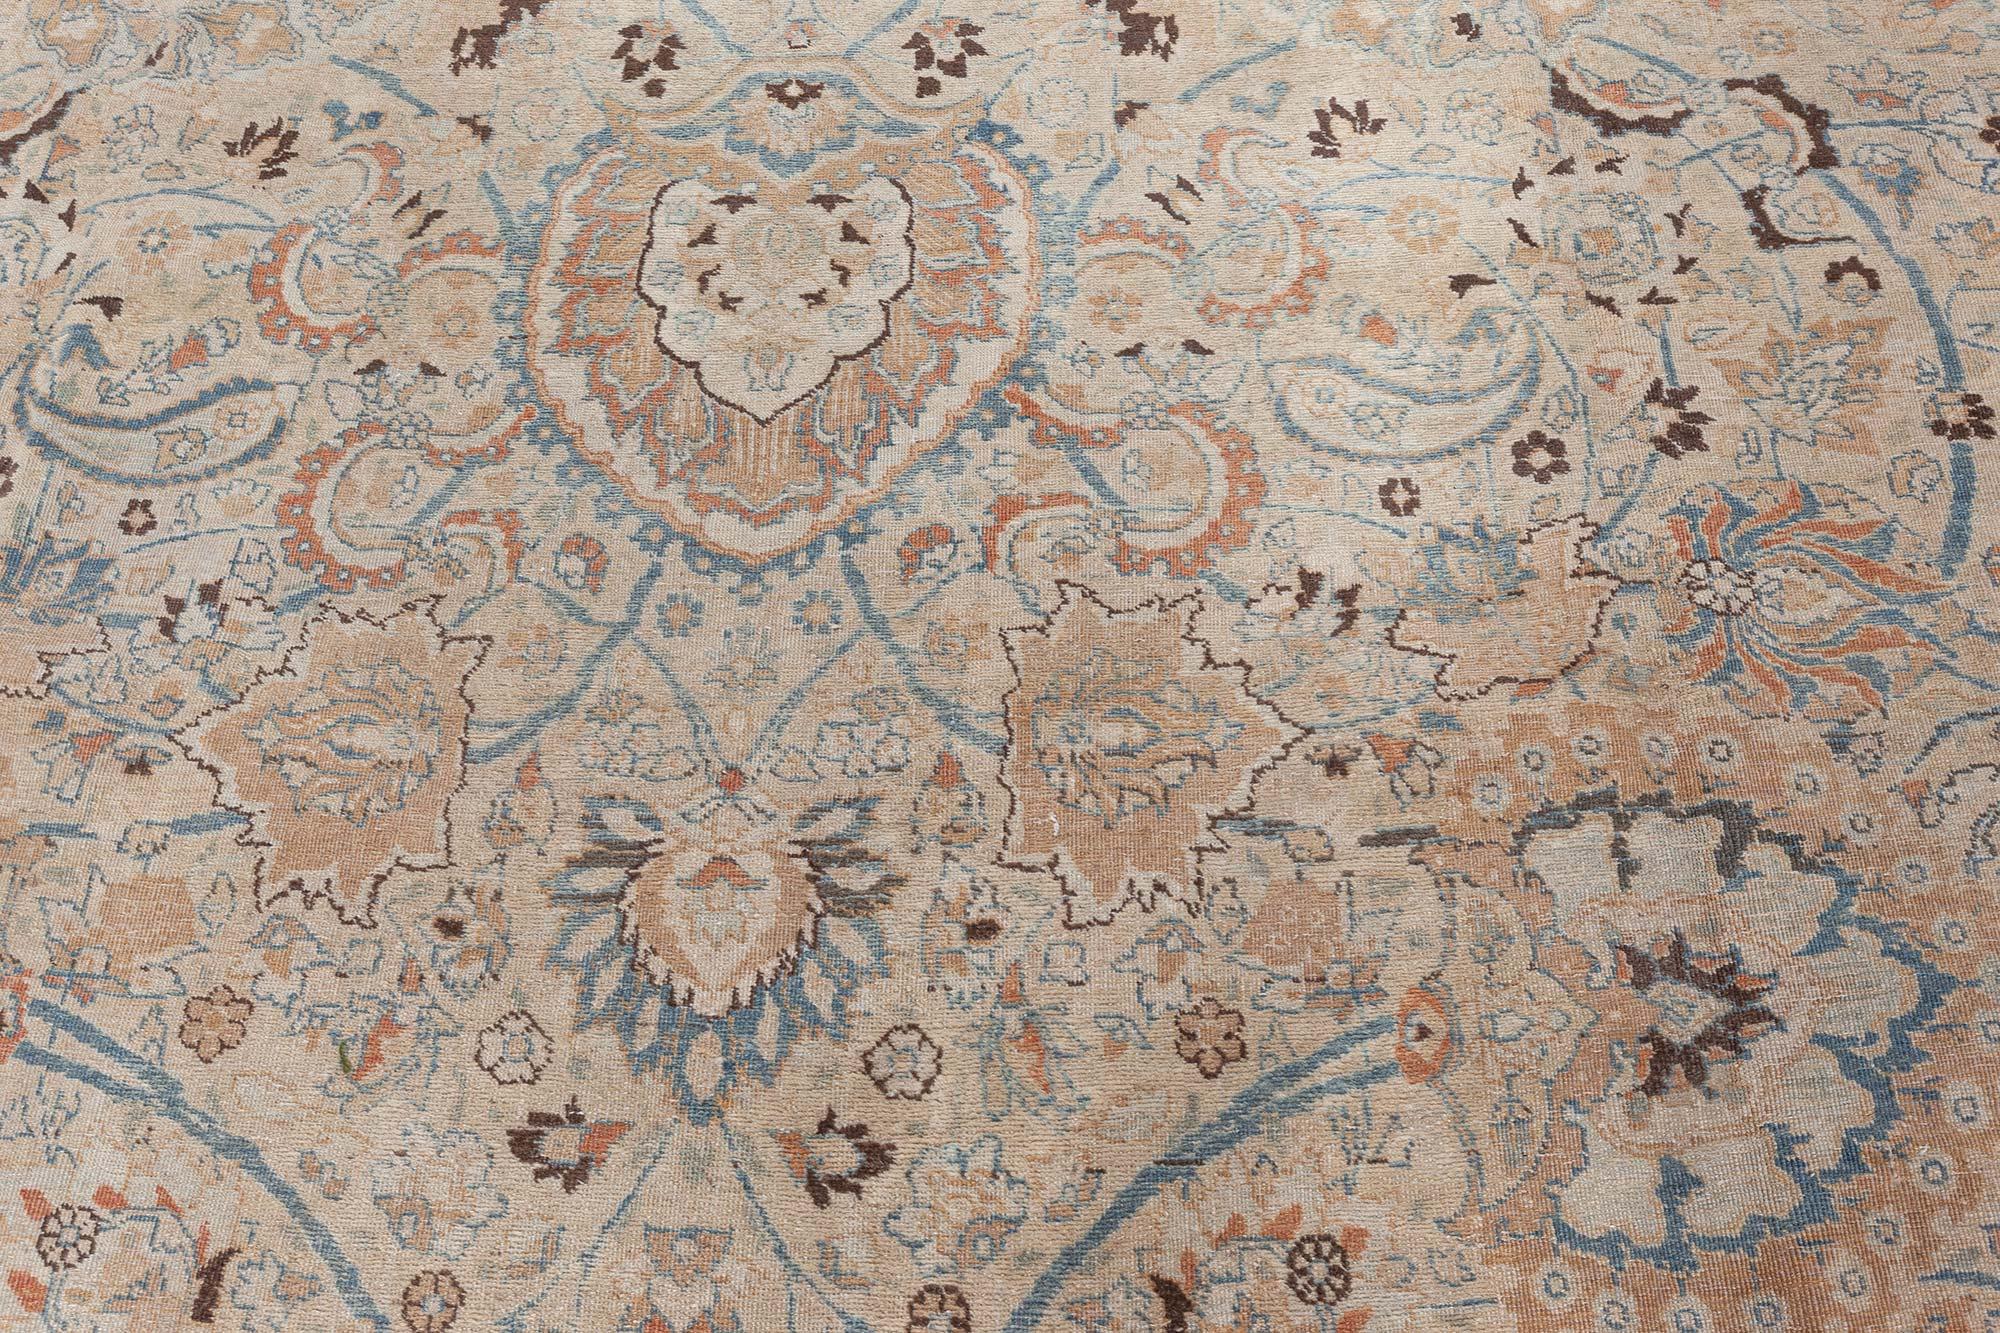 Antique Persian Khorassan handmade wool rug
This circa-1920 antique Persian Khorassan rug features an intricate all-over design of floral abstractions, arabesques, palmettes and curving vinery in shades of blue, brown and beige against a field of